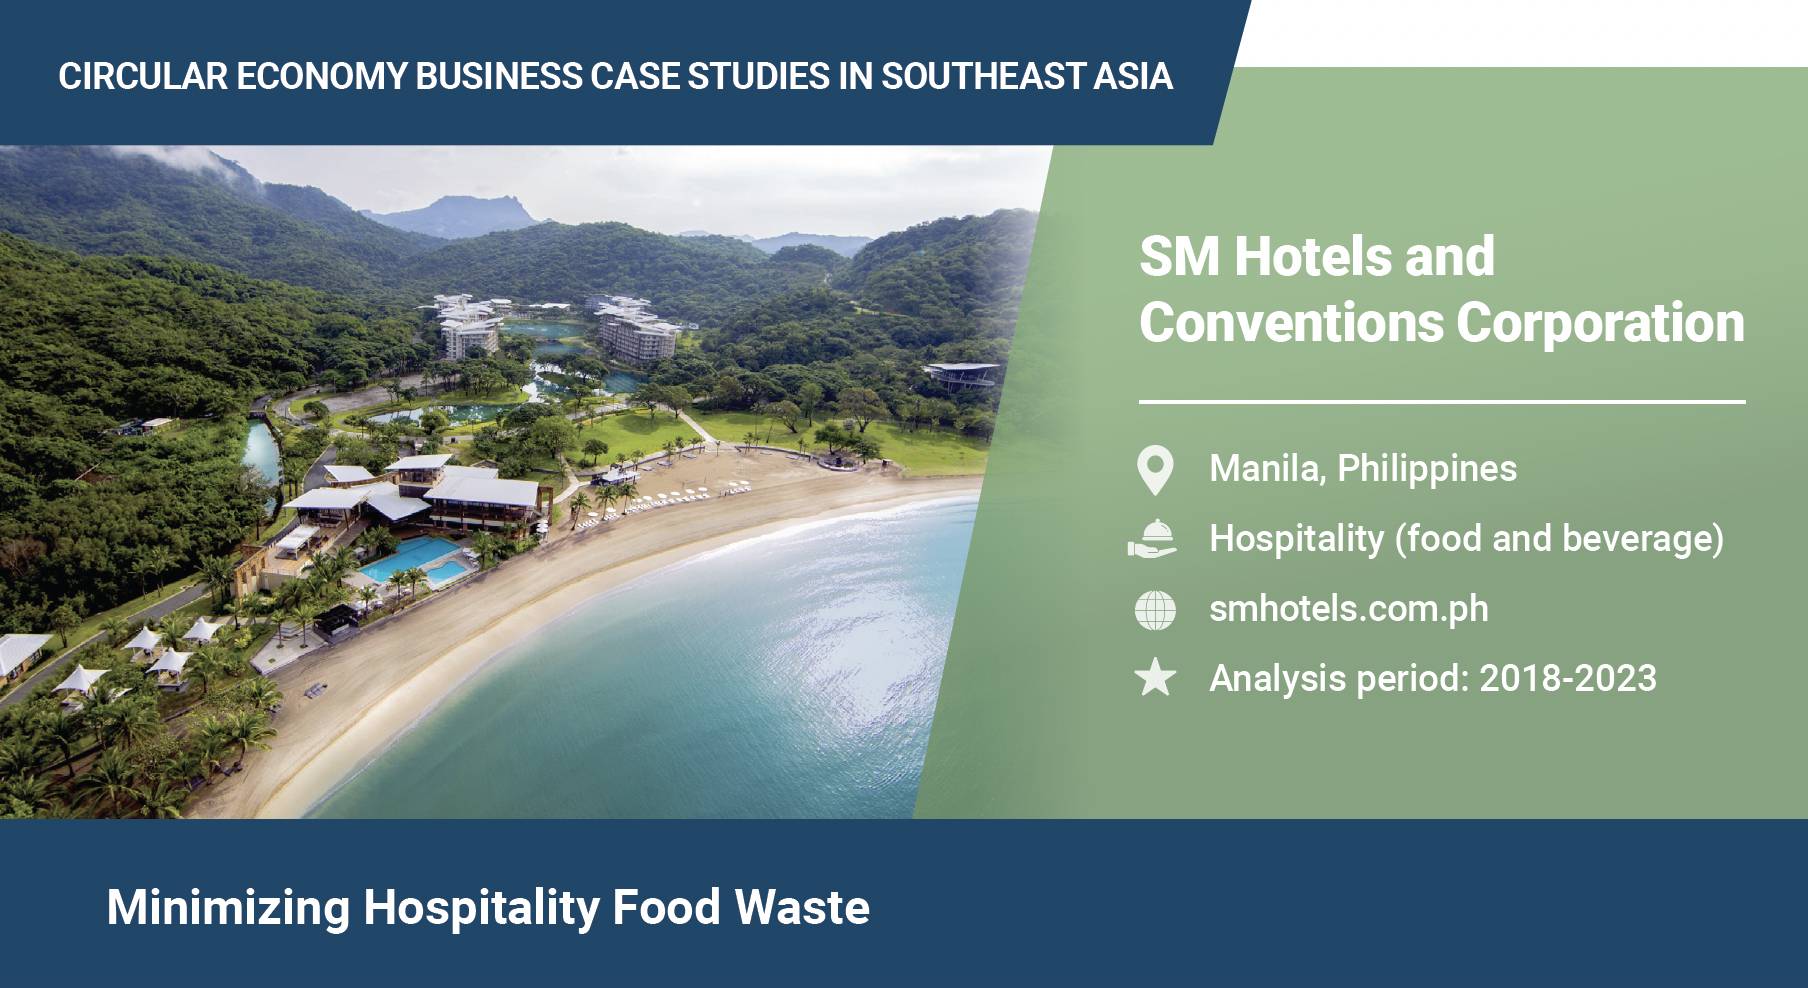 SM Hotels and Conventions Corporation